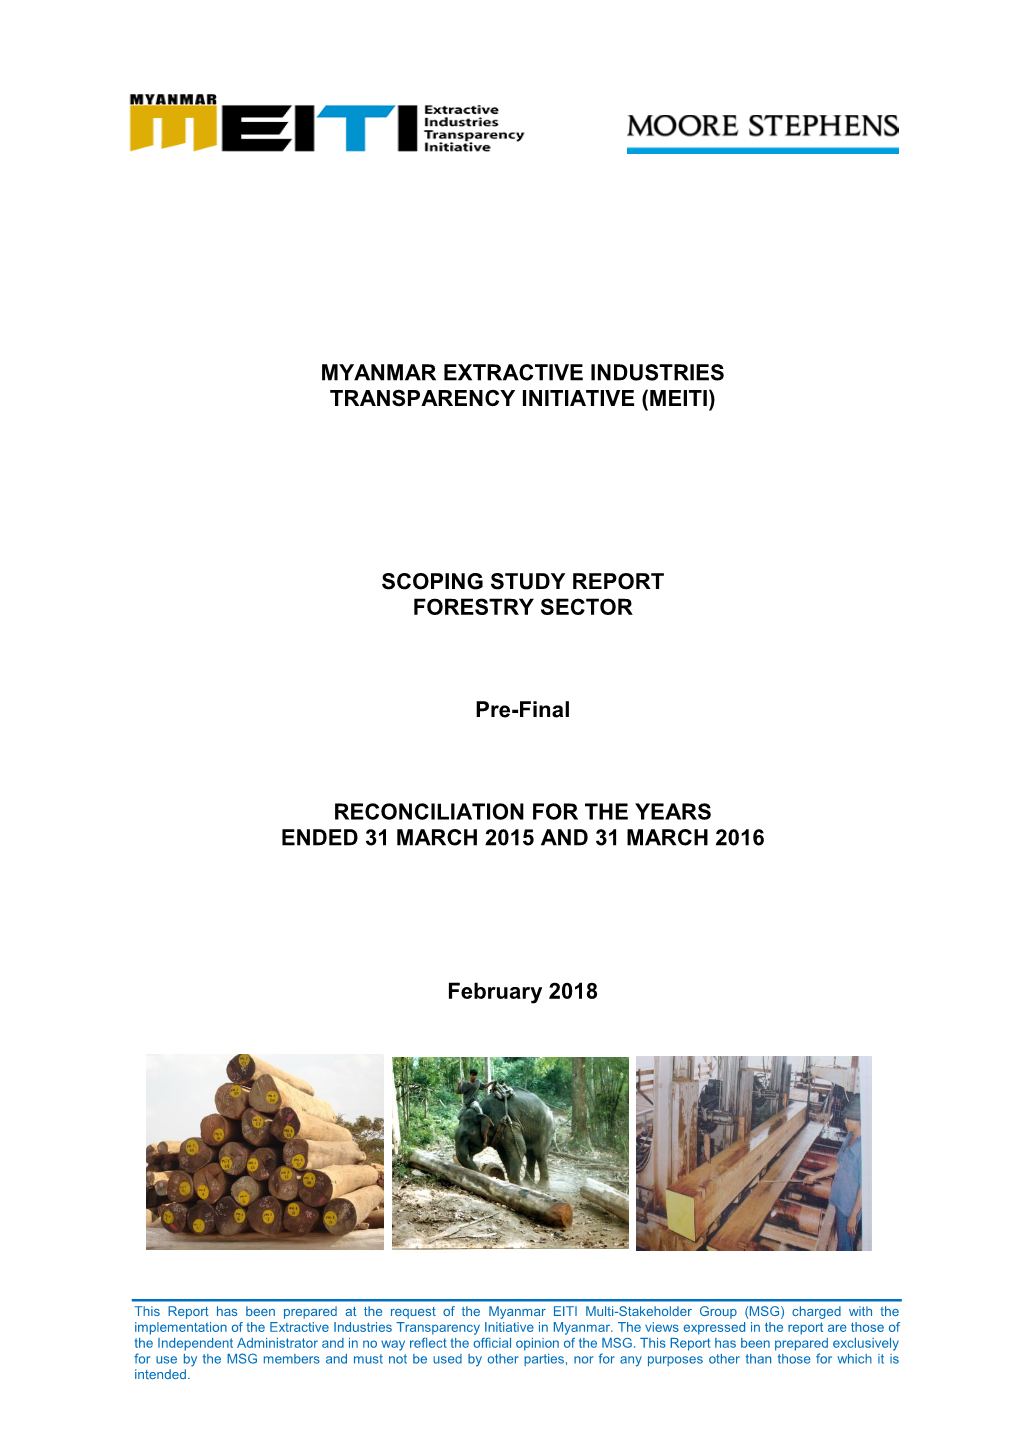 MYANMAR EXTRACTIVE INDUSTRIES TRANSPARENCY INITIATIVE (MEITI) SCOPING STUDY REPORT FORESTRY SECTOR Pre-Final RECONCILIATION